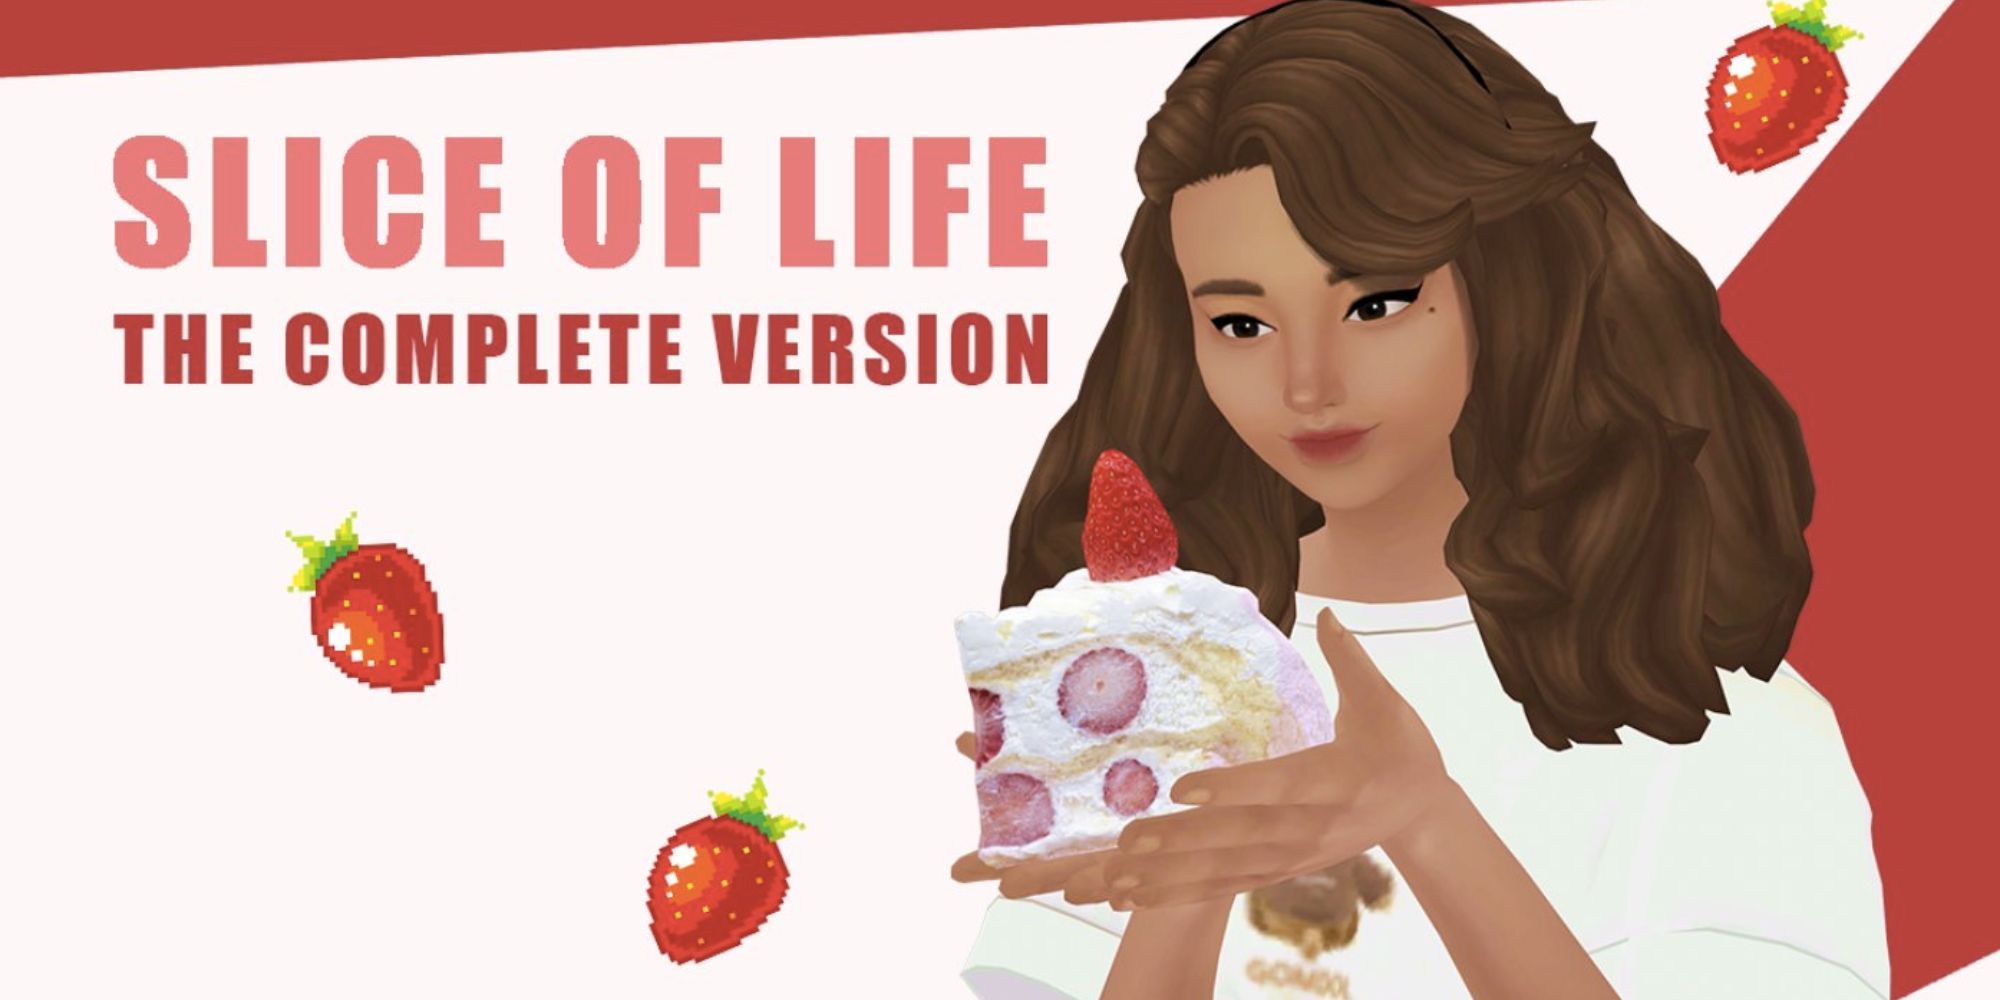 The Sims 4 Slice Of Life